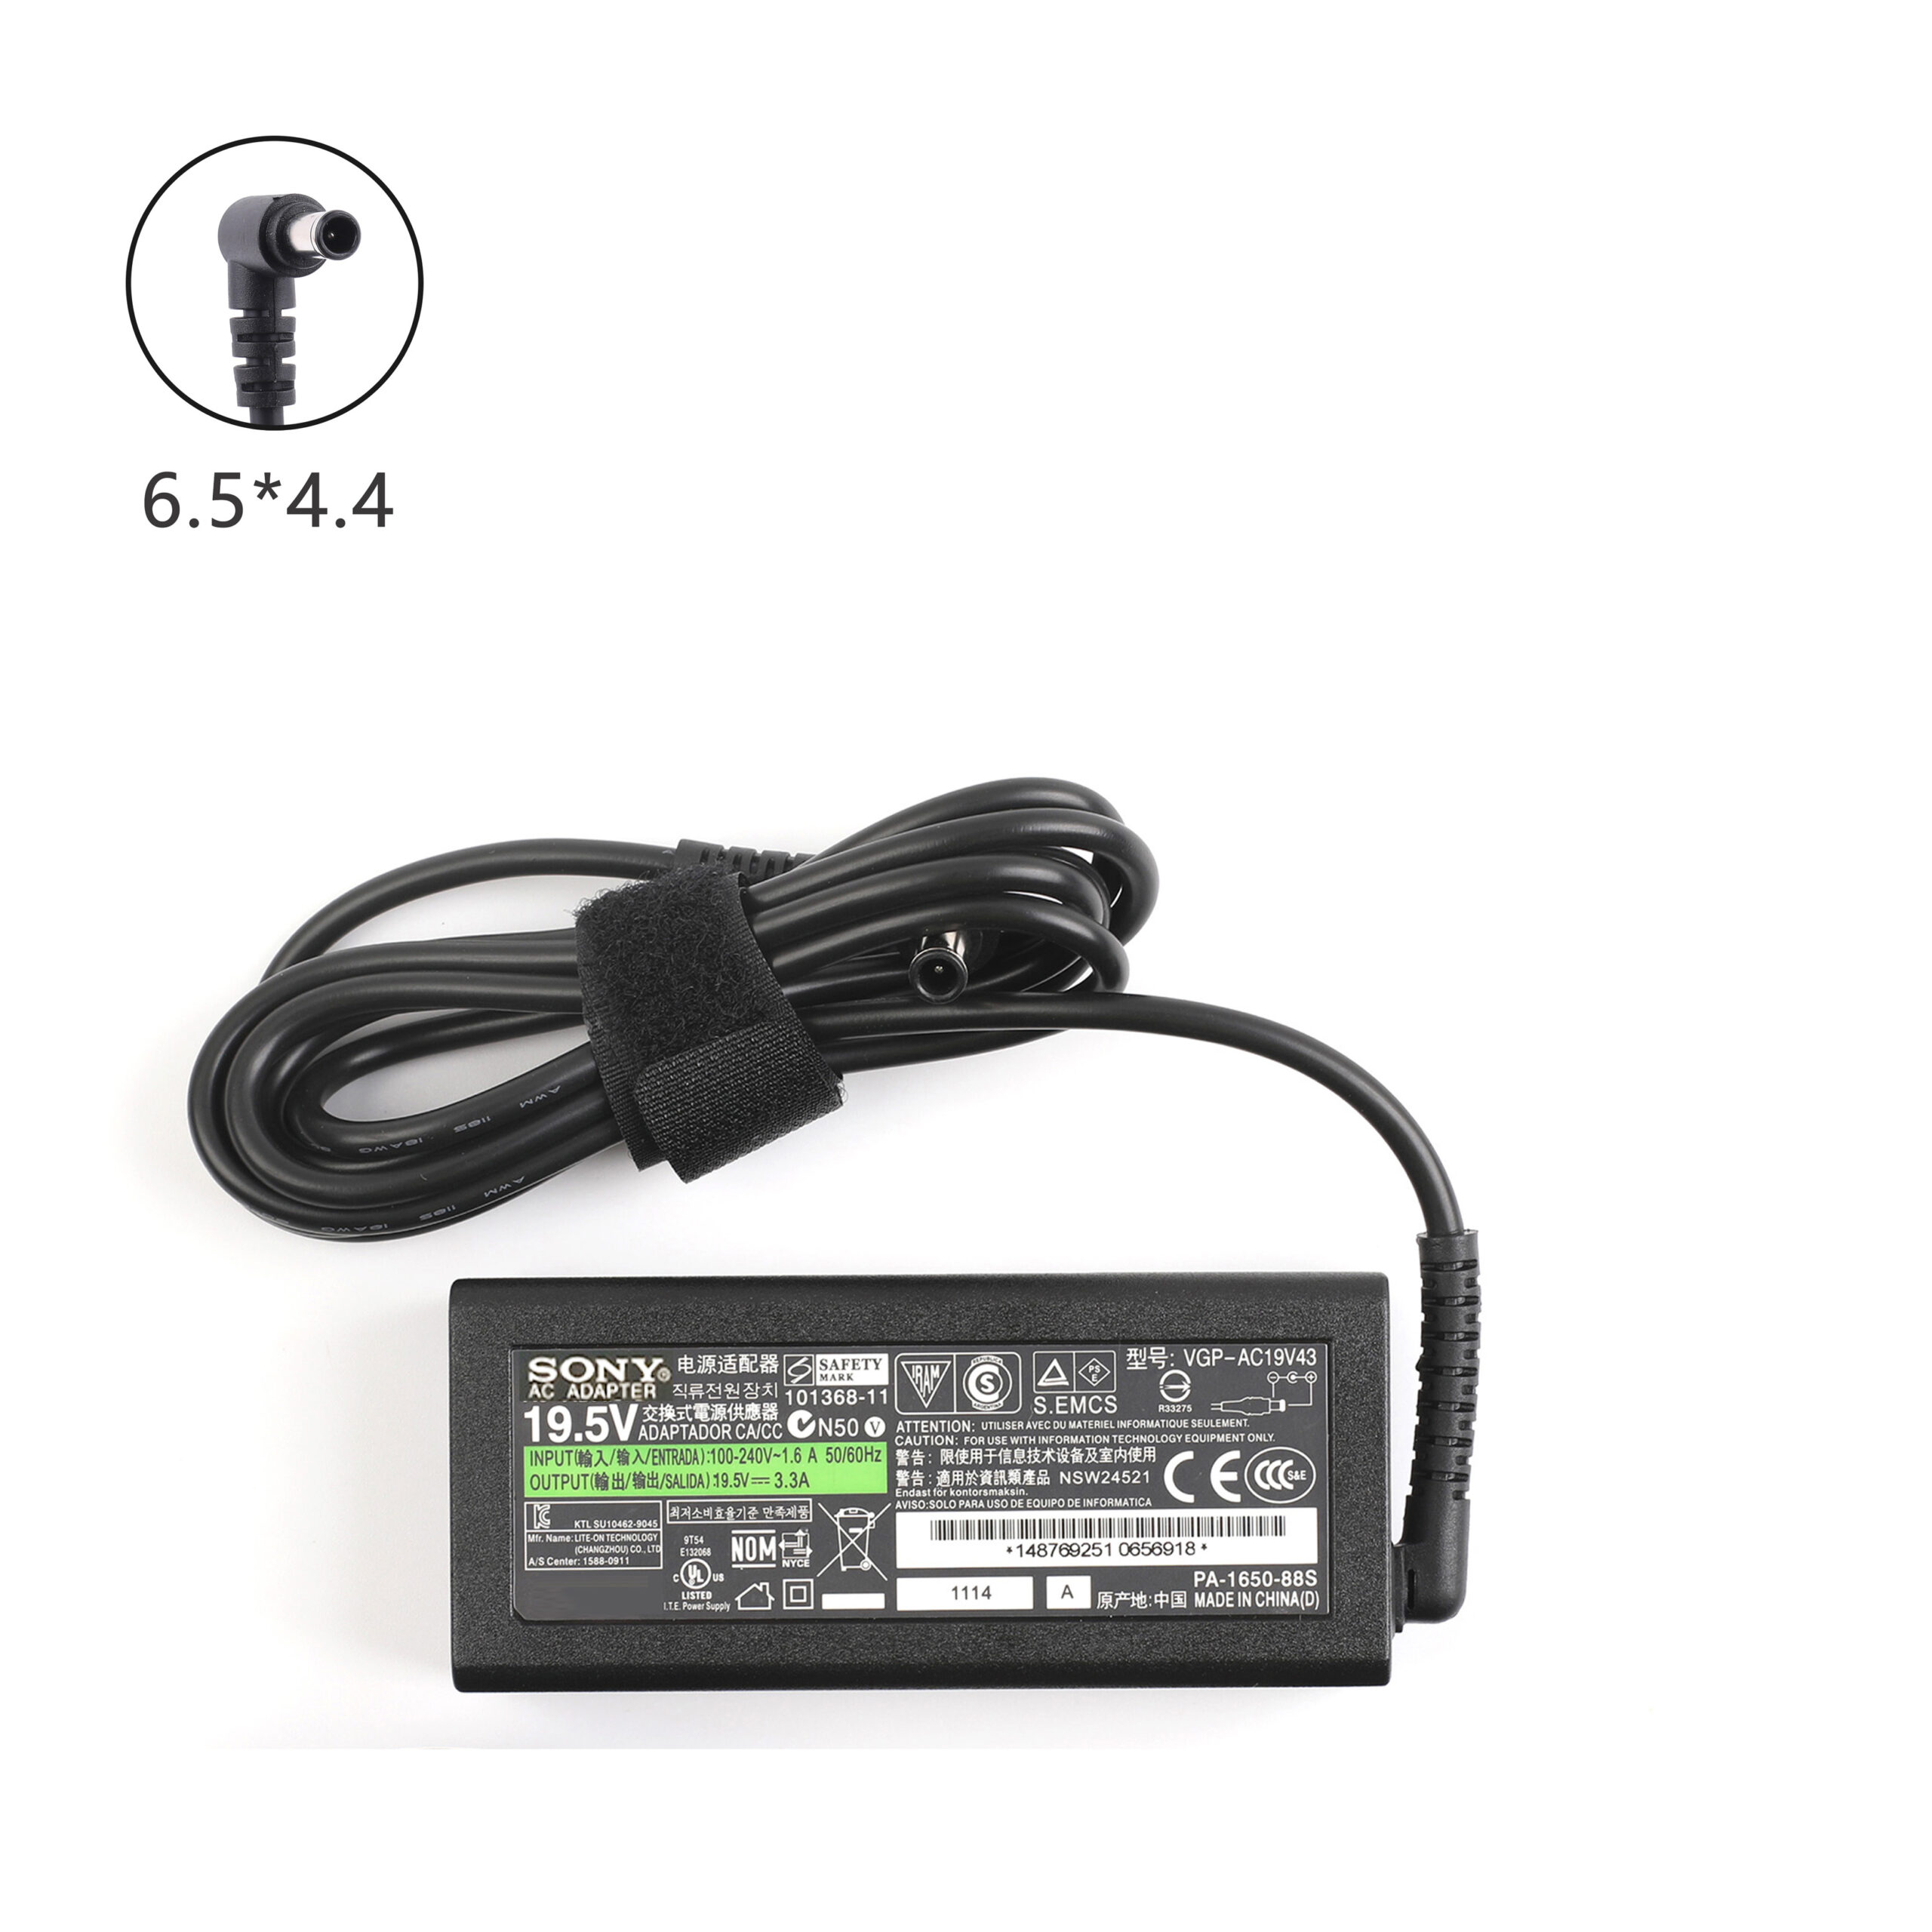 Sony Vaio Fit SVF1521G2R Sony 65W 19.5V 3.3A 6.5 4.4MM Adaptateur Chargeur Adapter